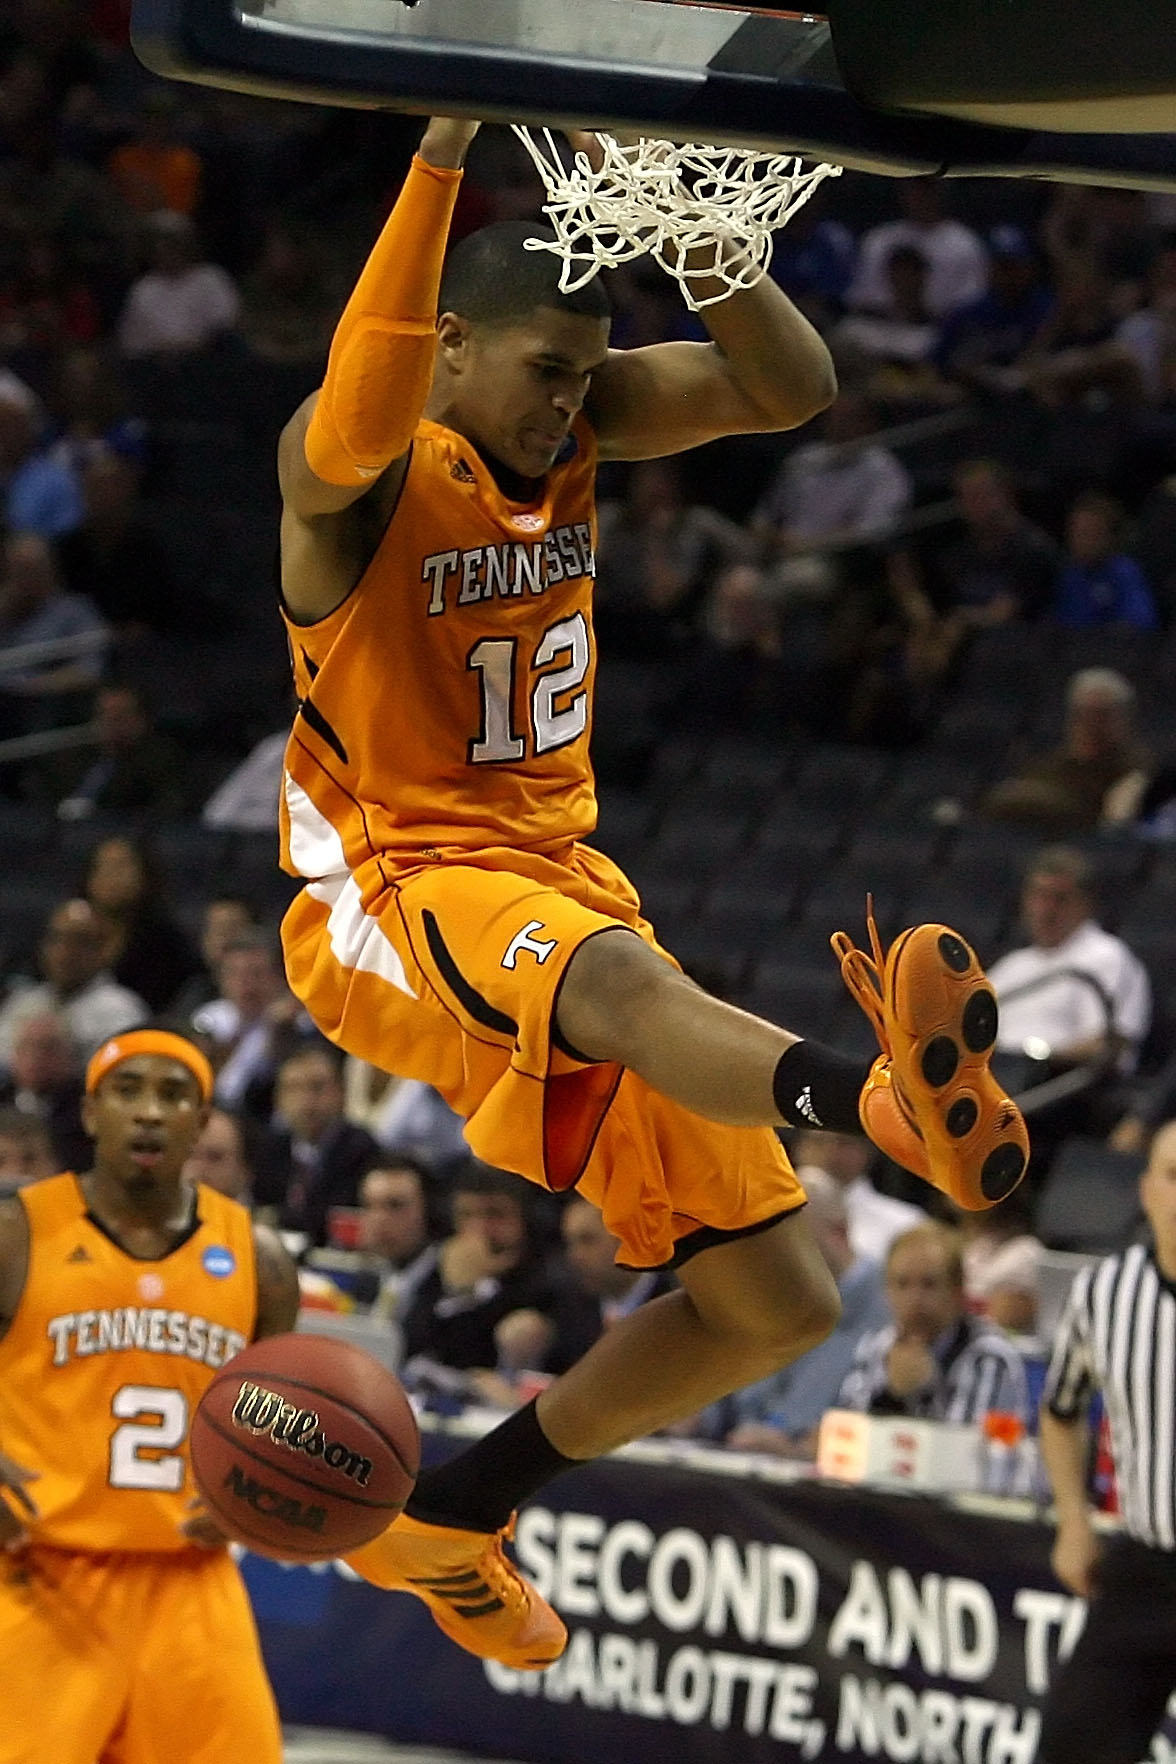 CHARLOTTE, NC - MARCH 18:  Tobias Harris #12 of the Tennessee Volunteers dunks the ball while taking on the Michigan Wolverines in the first half during the second round of the 2011 NCAA men's basketball tournament at Time Warner Cable Arena on March 18, 